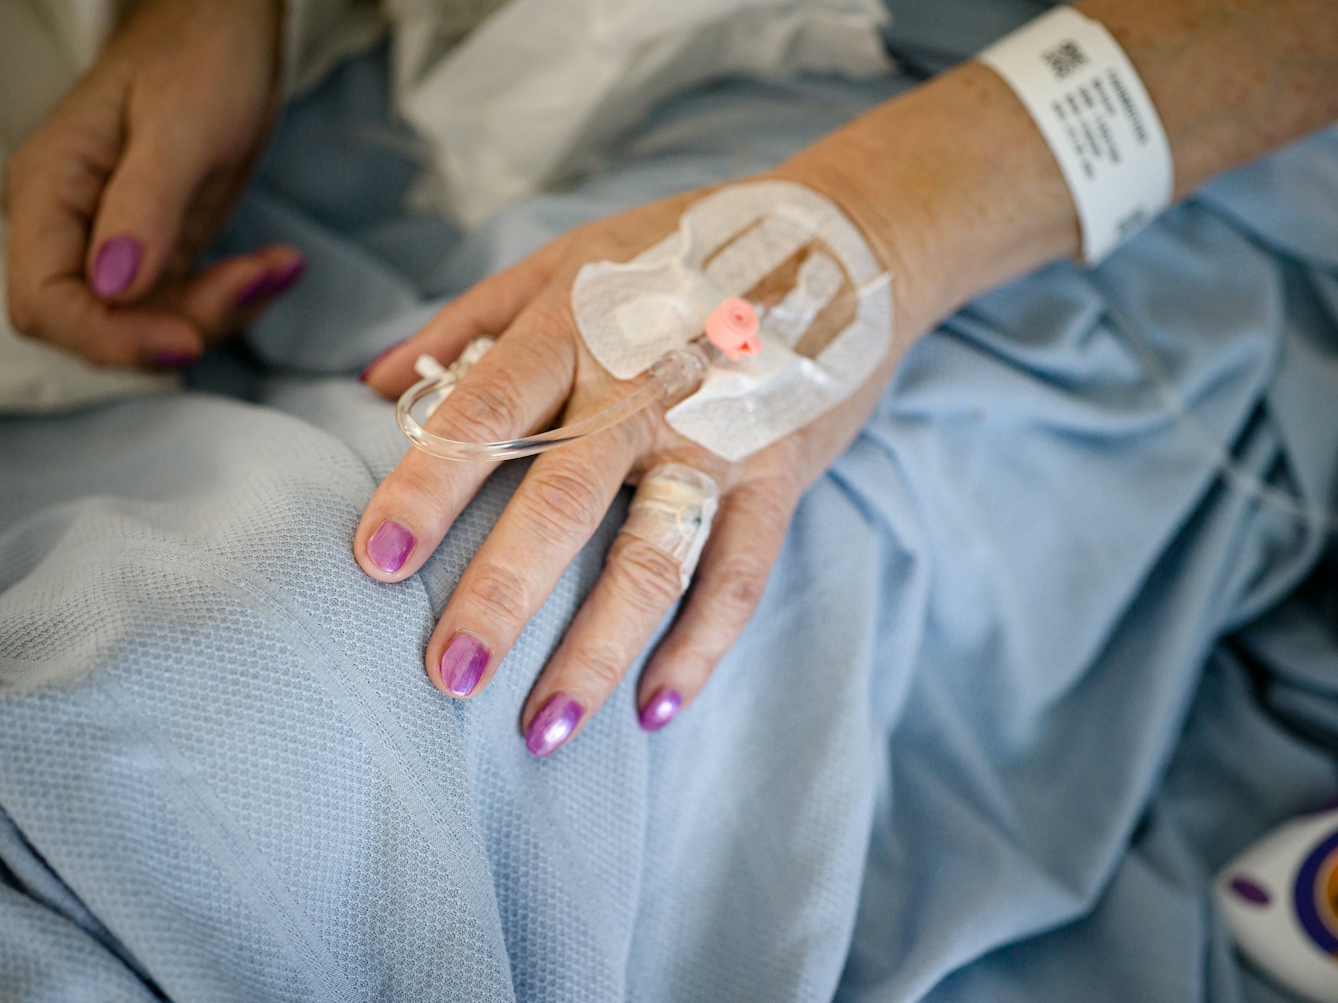 Photograph of the hands of a patient with glittery purple painted fingernails, resting on a light blue hospital bedsheet. The patient's hospital name tag and cannula can be seen.